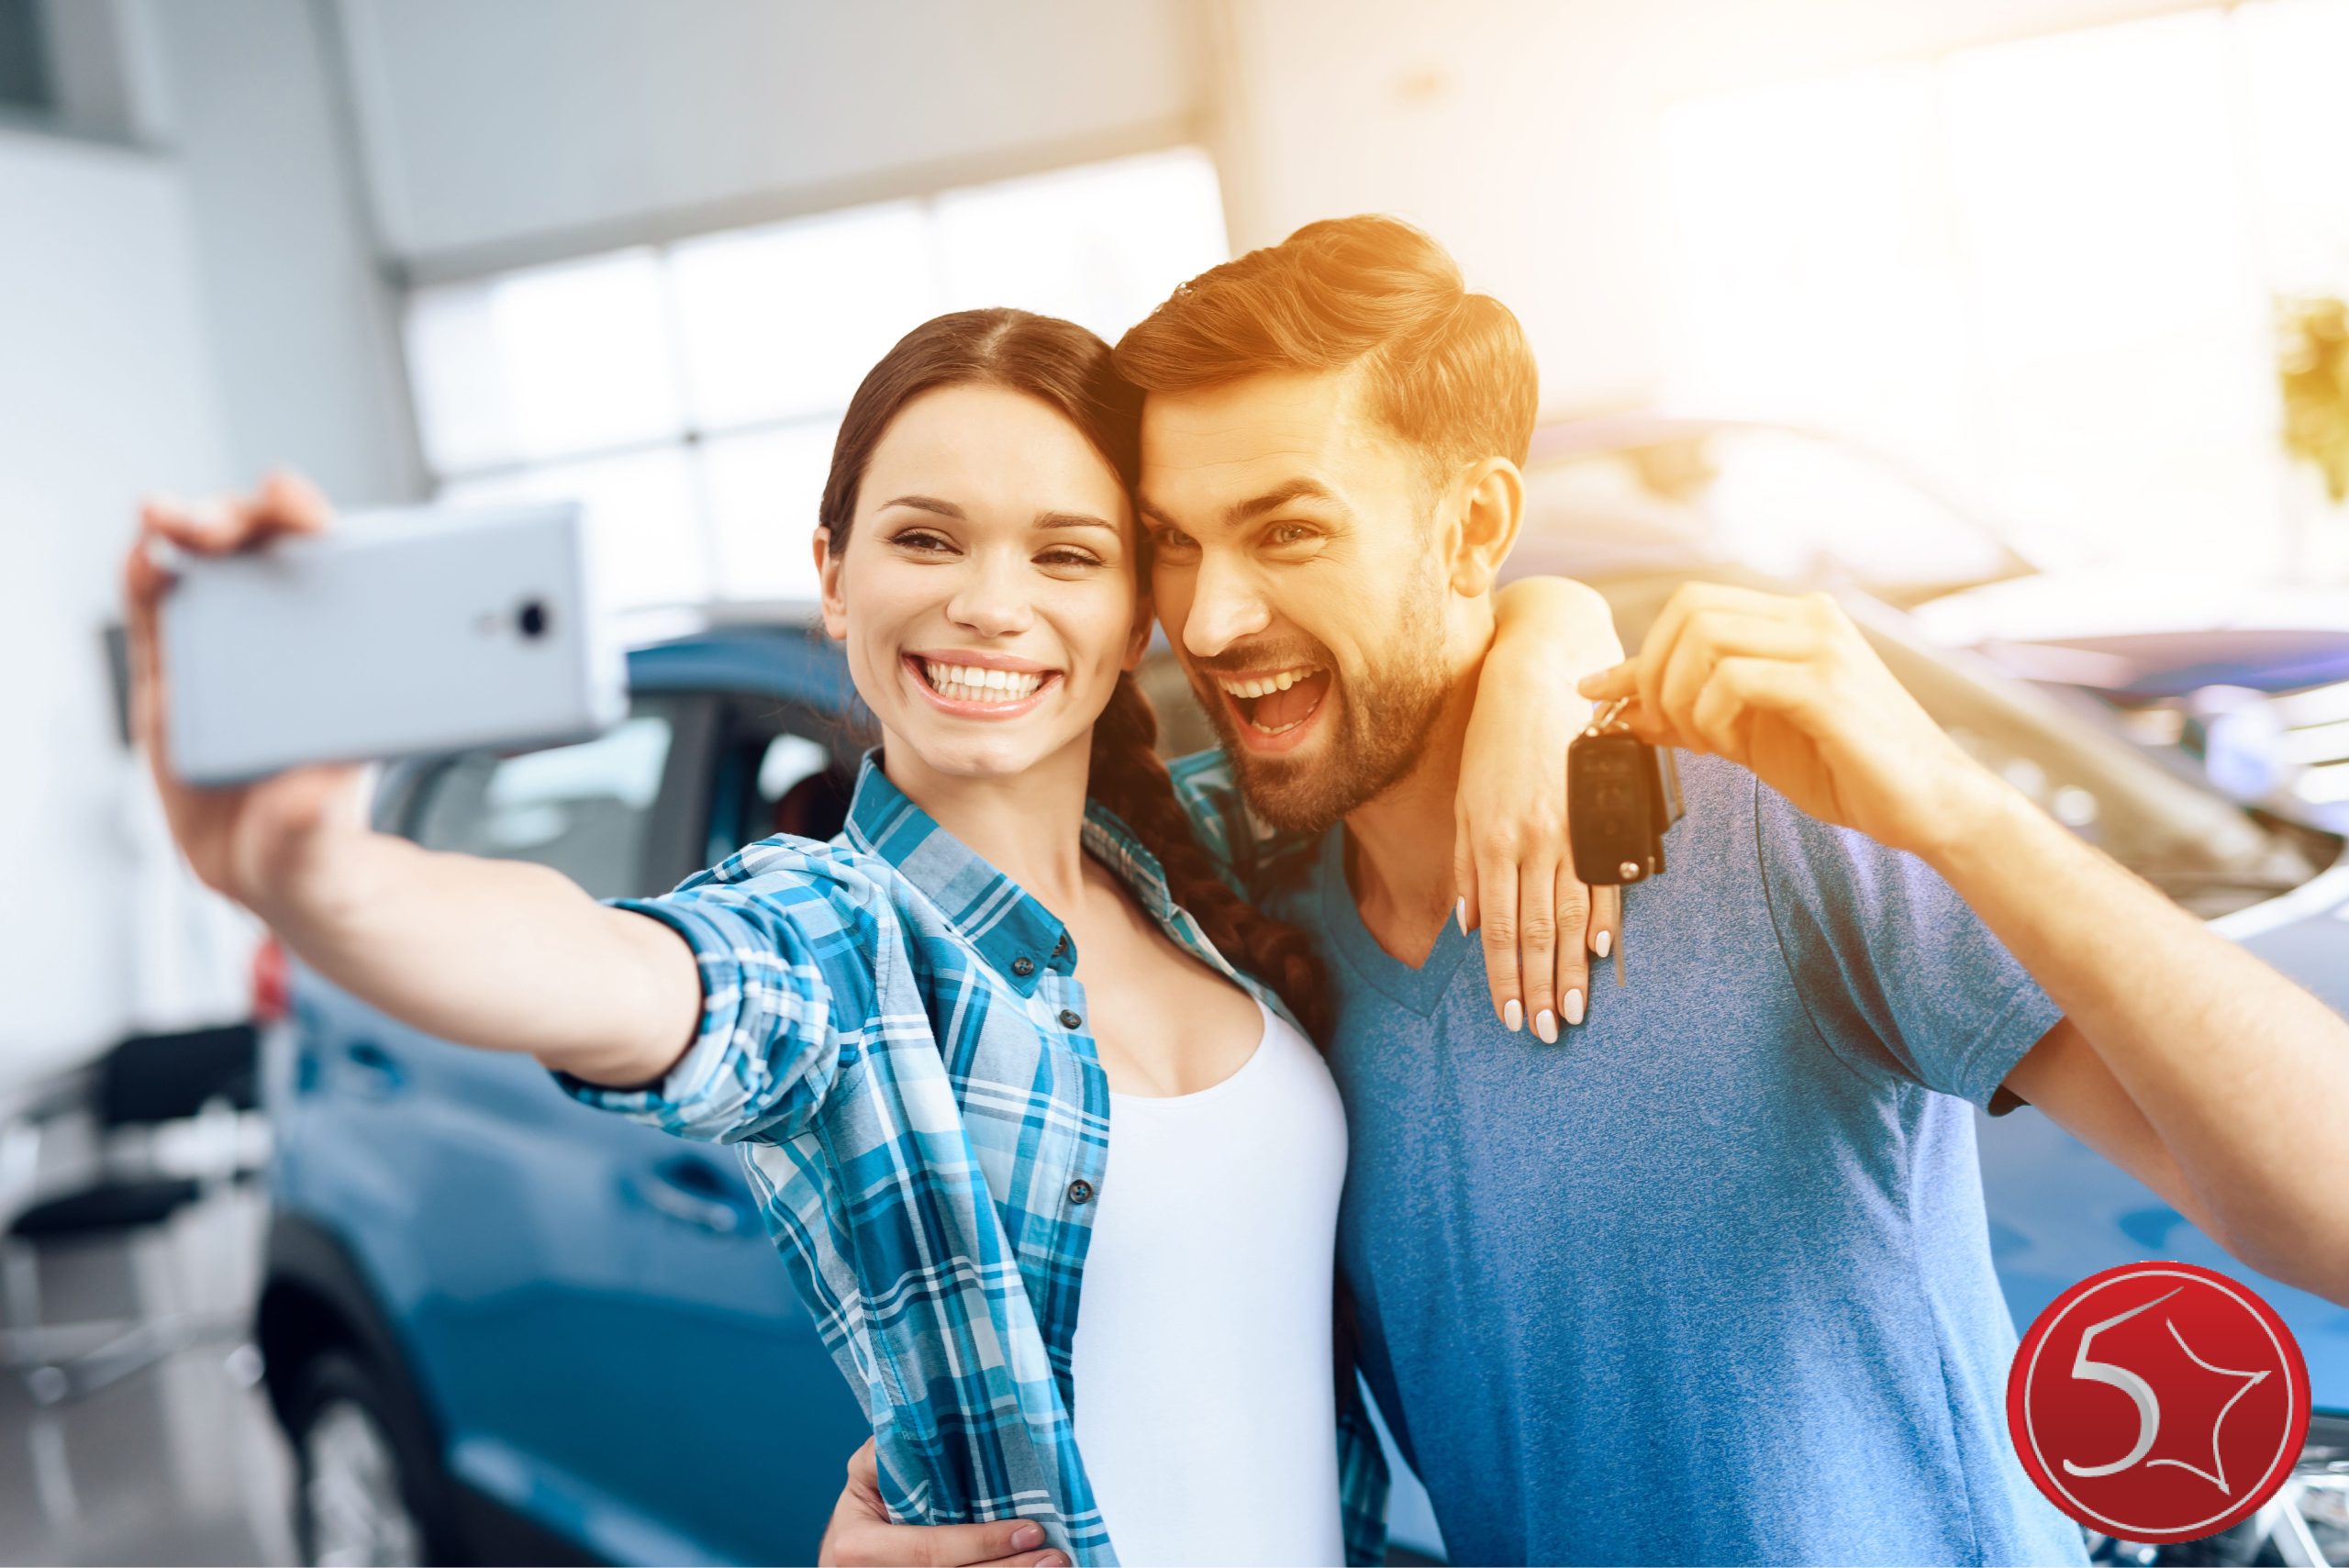 Find Your Next Ride With Our Affordable Used Cars in St. Peters